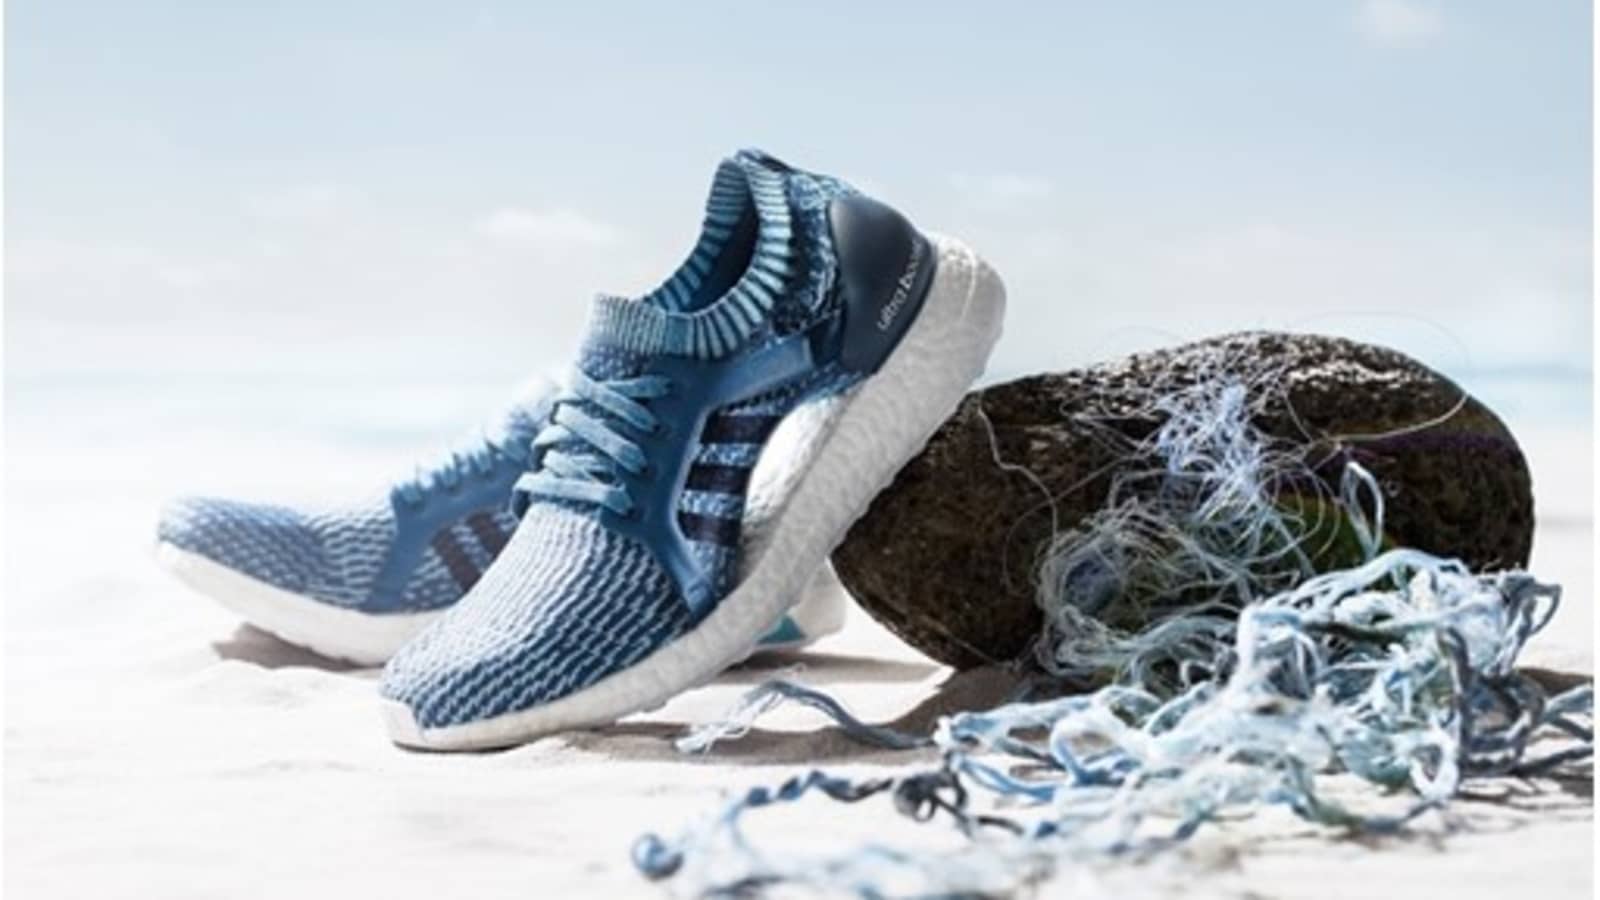 Adidas sold 1 shoes made out of ocean plastic